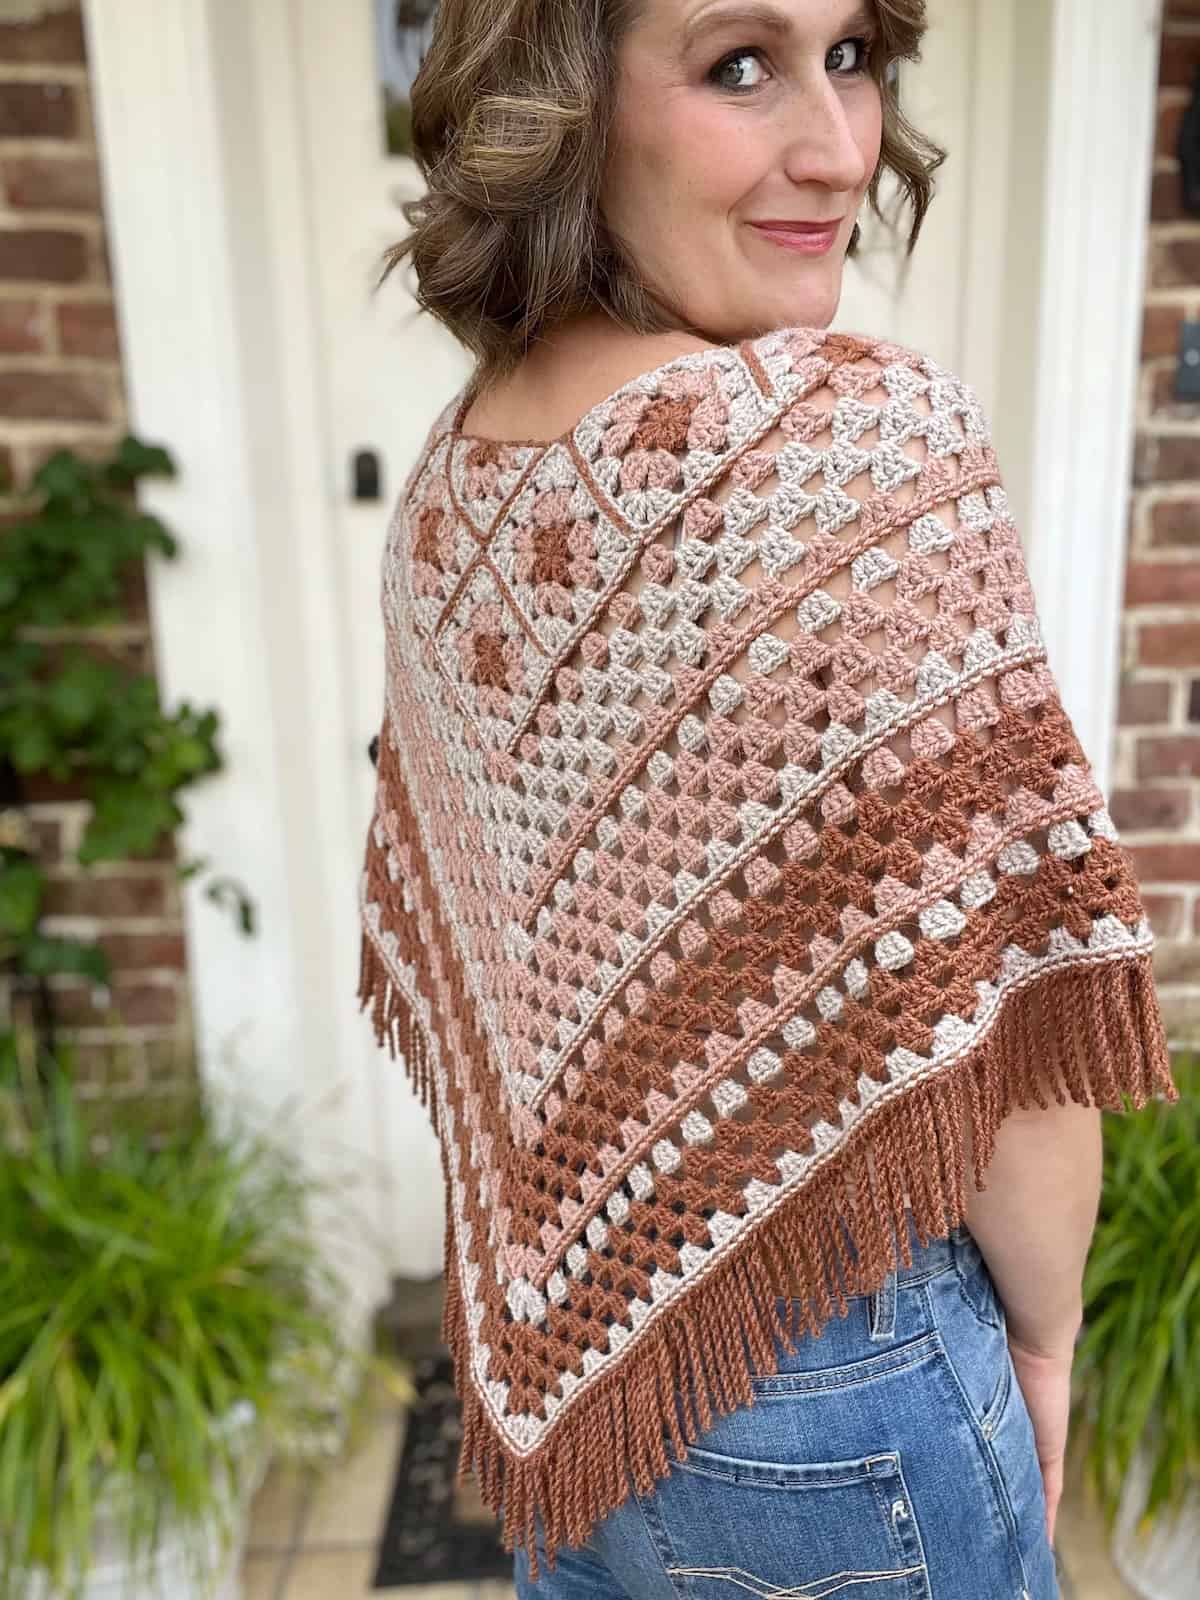 The back of a woman wearing a crocheted poncho.